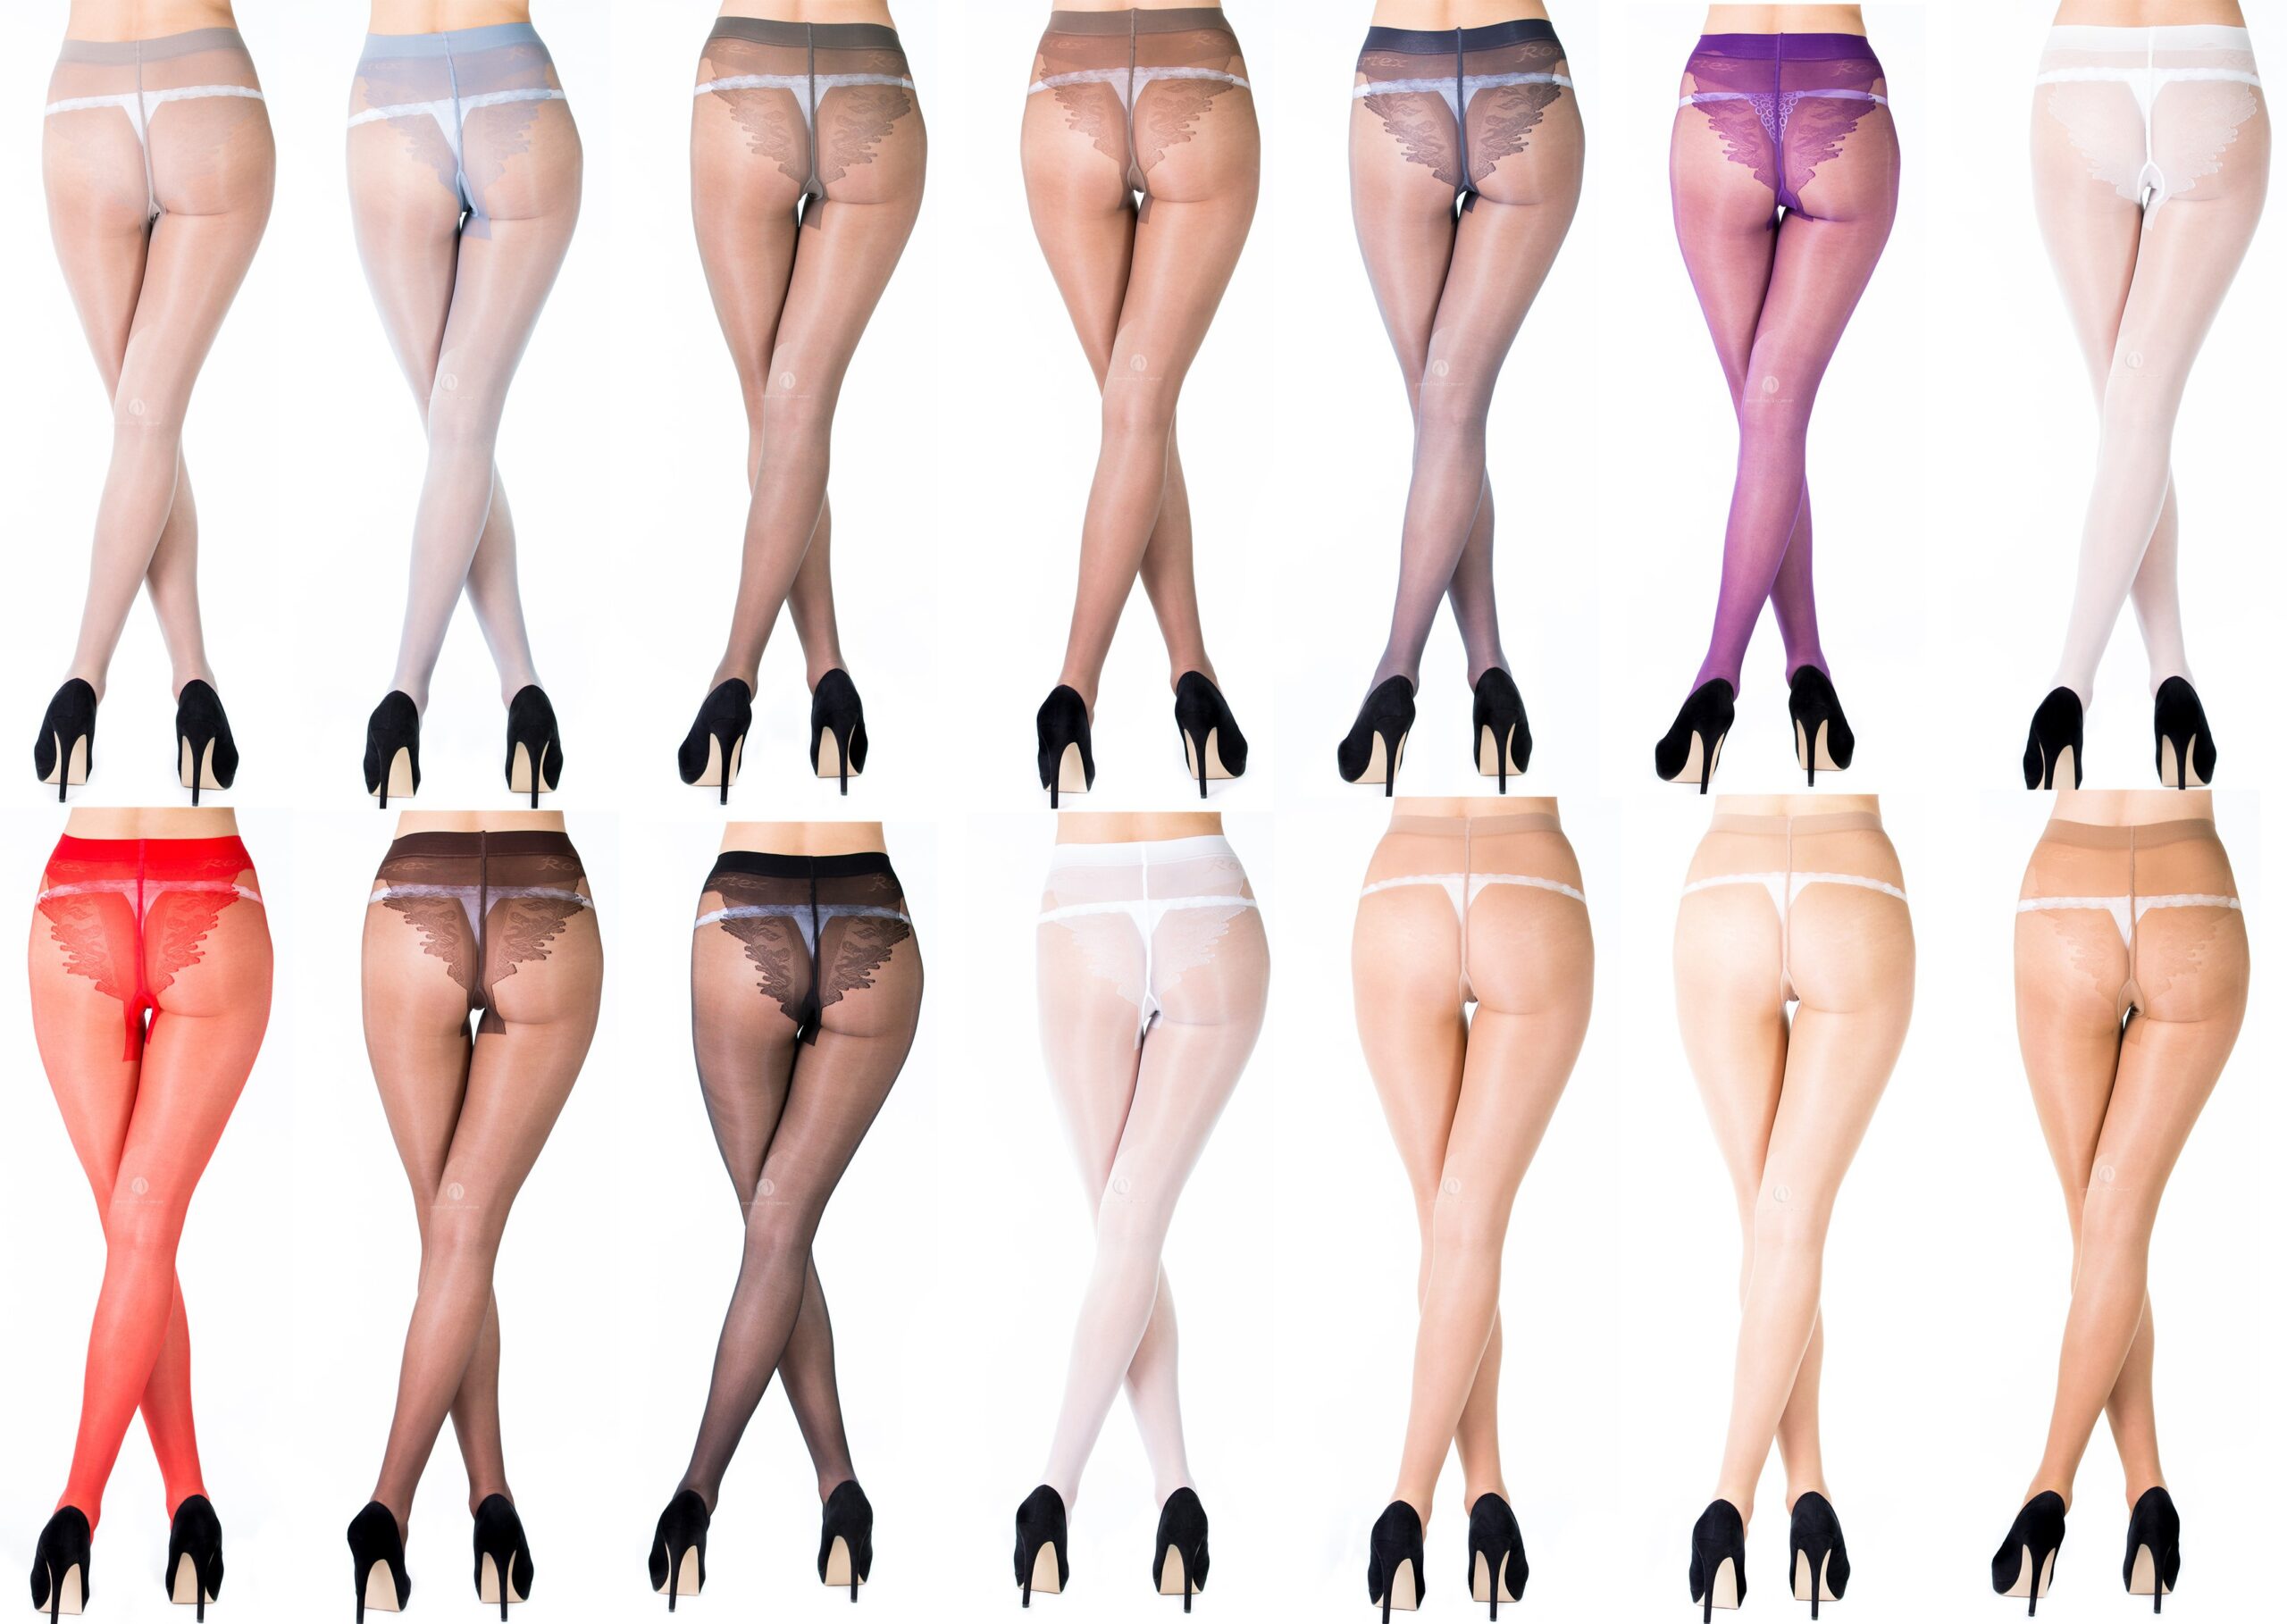 Sheer Soft Tights With High Cut Bikini Patterned Mock Lace Brief, By Romartex "KARINA"